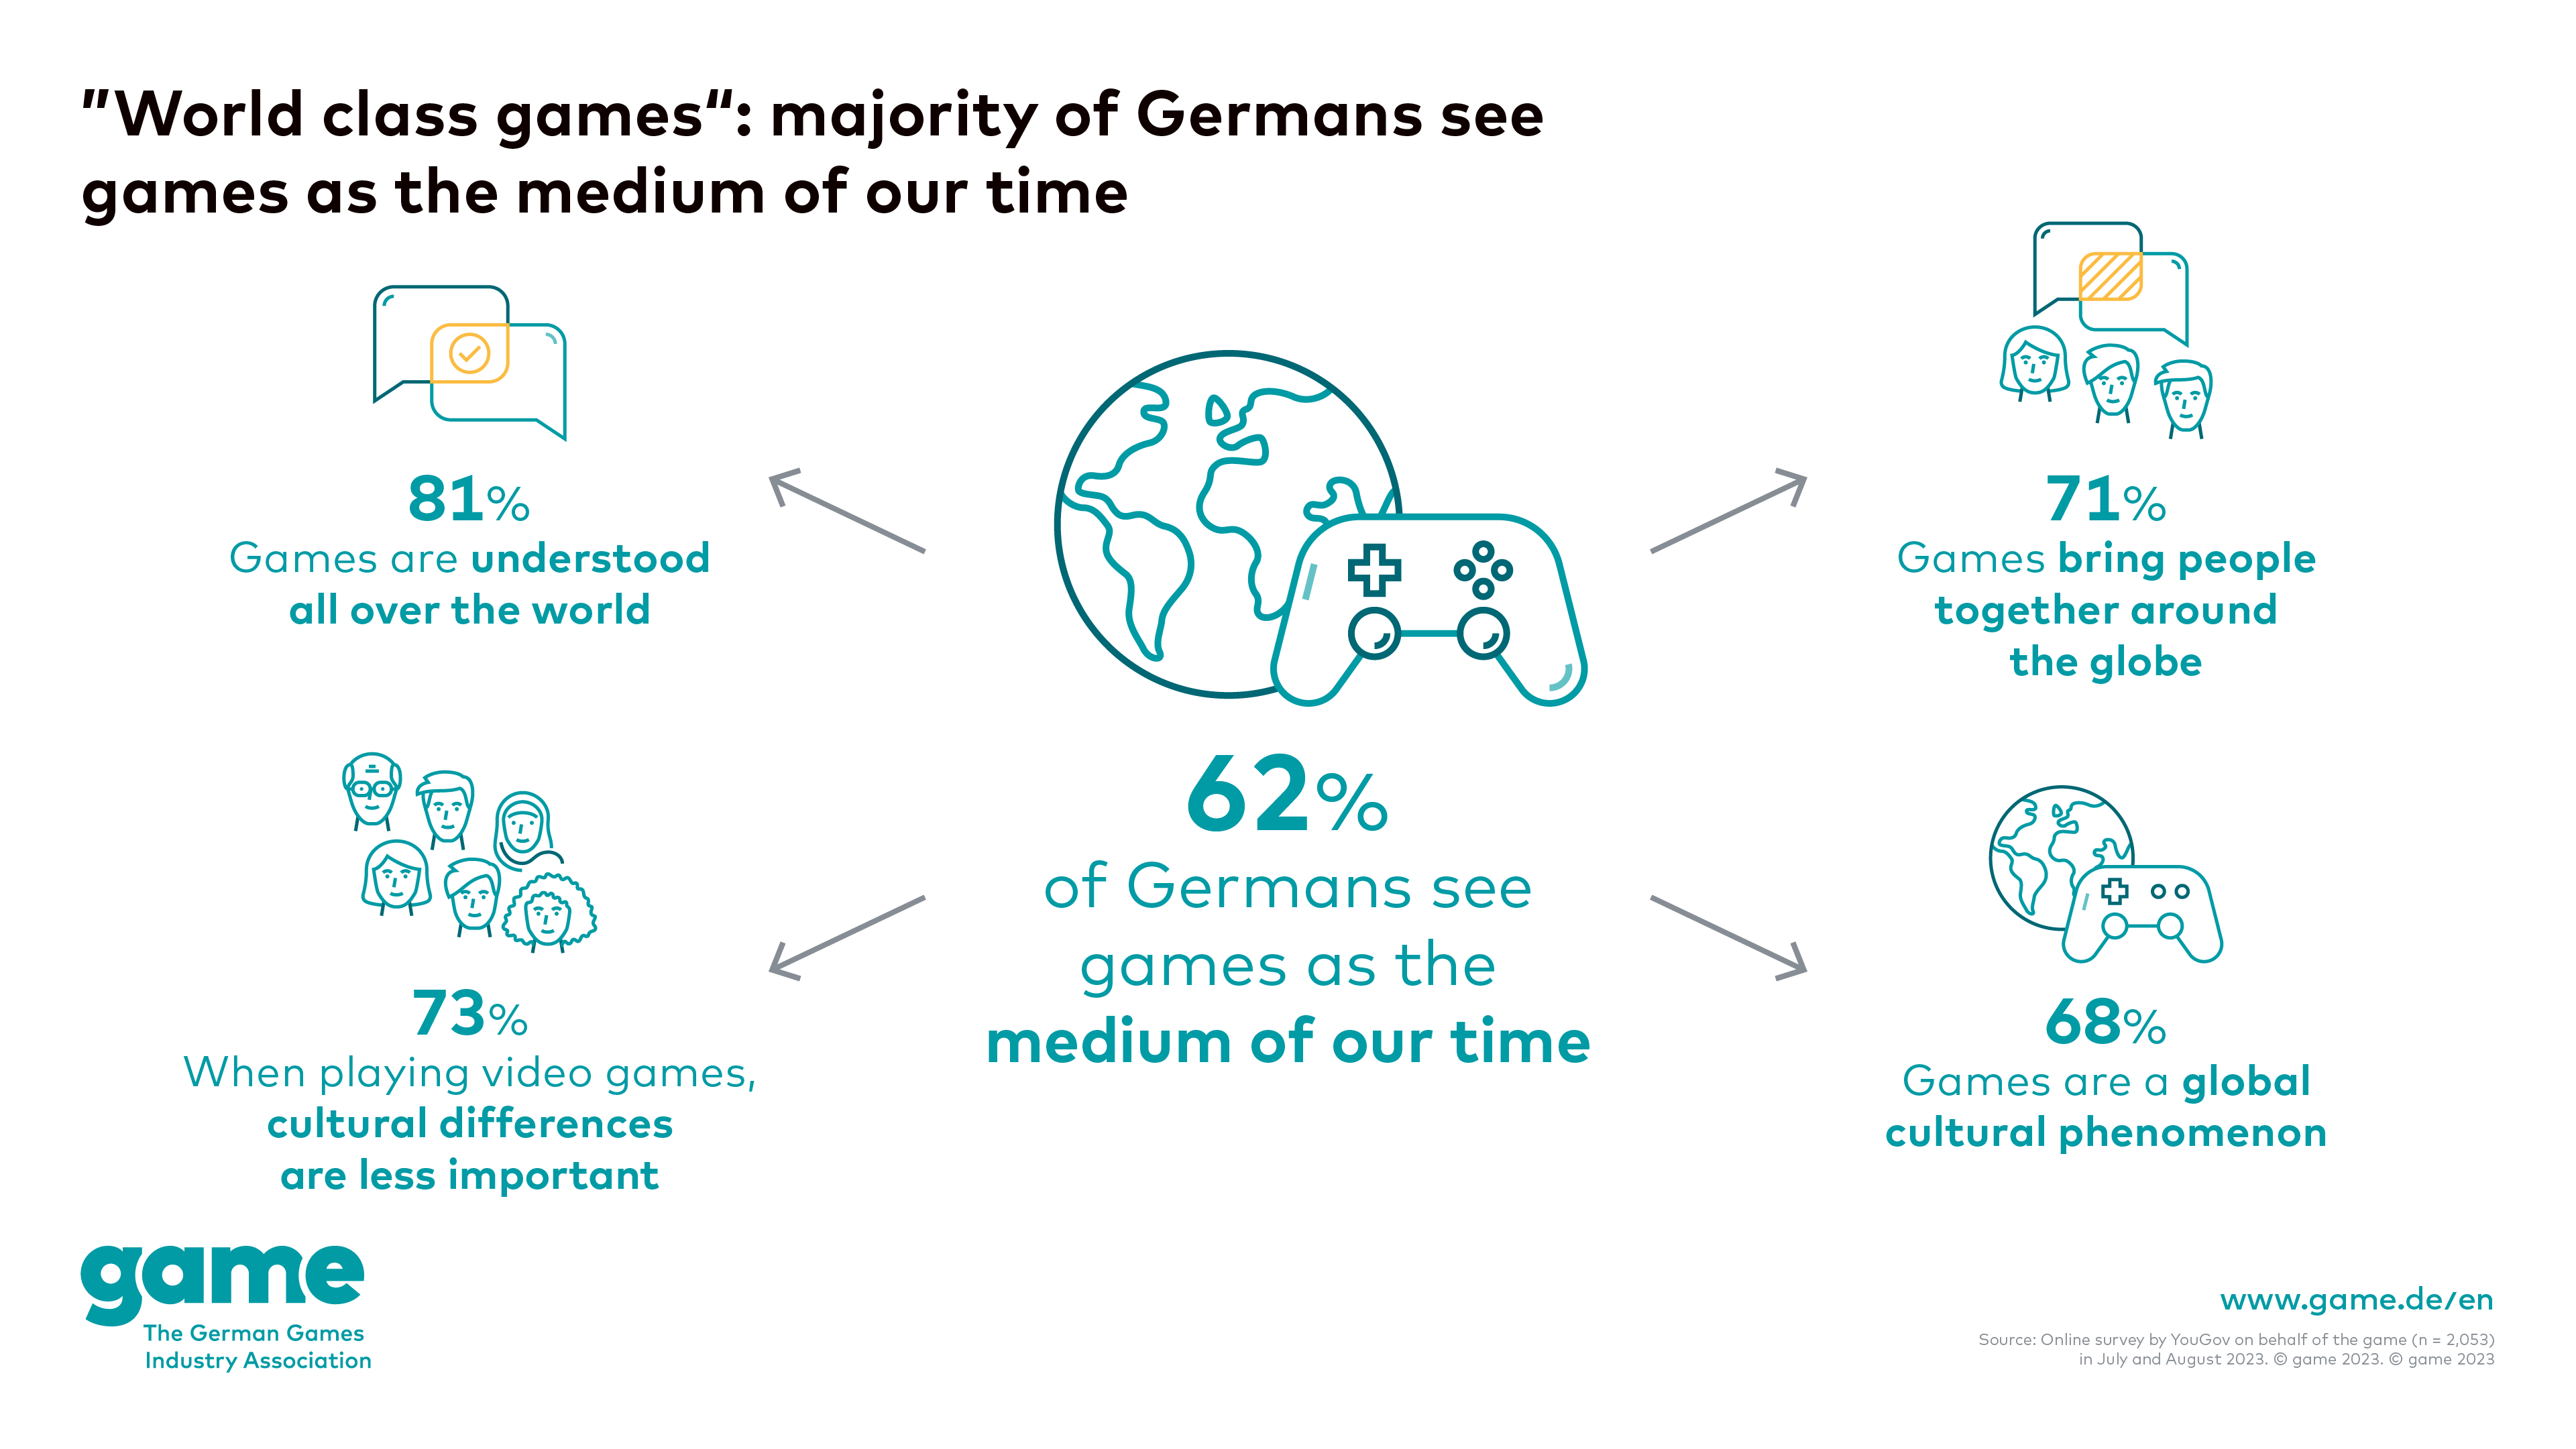 “World class of games”: majority of Germans see games as the medium of our time